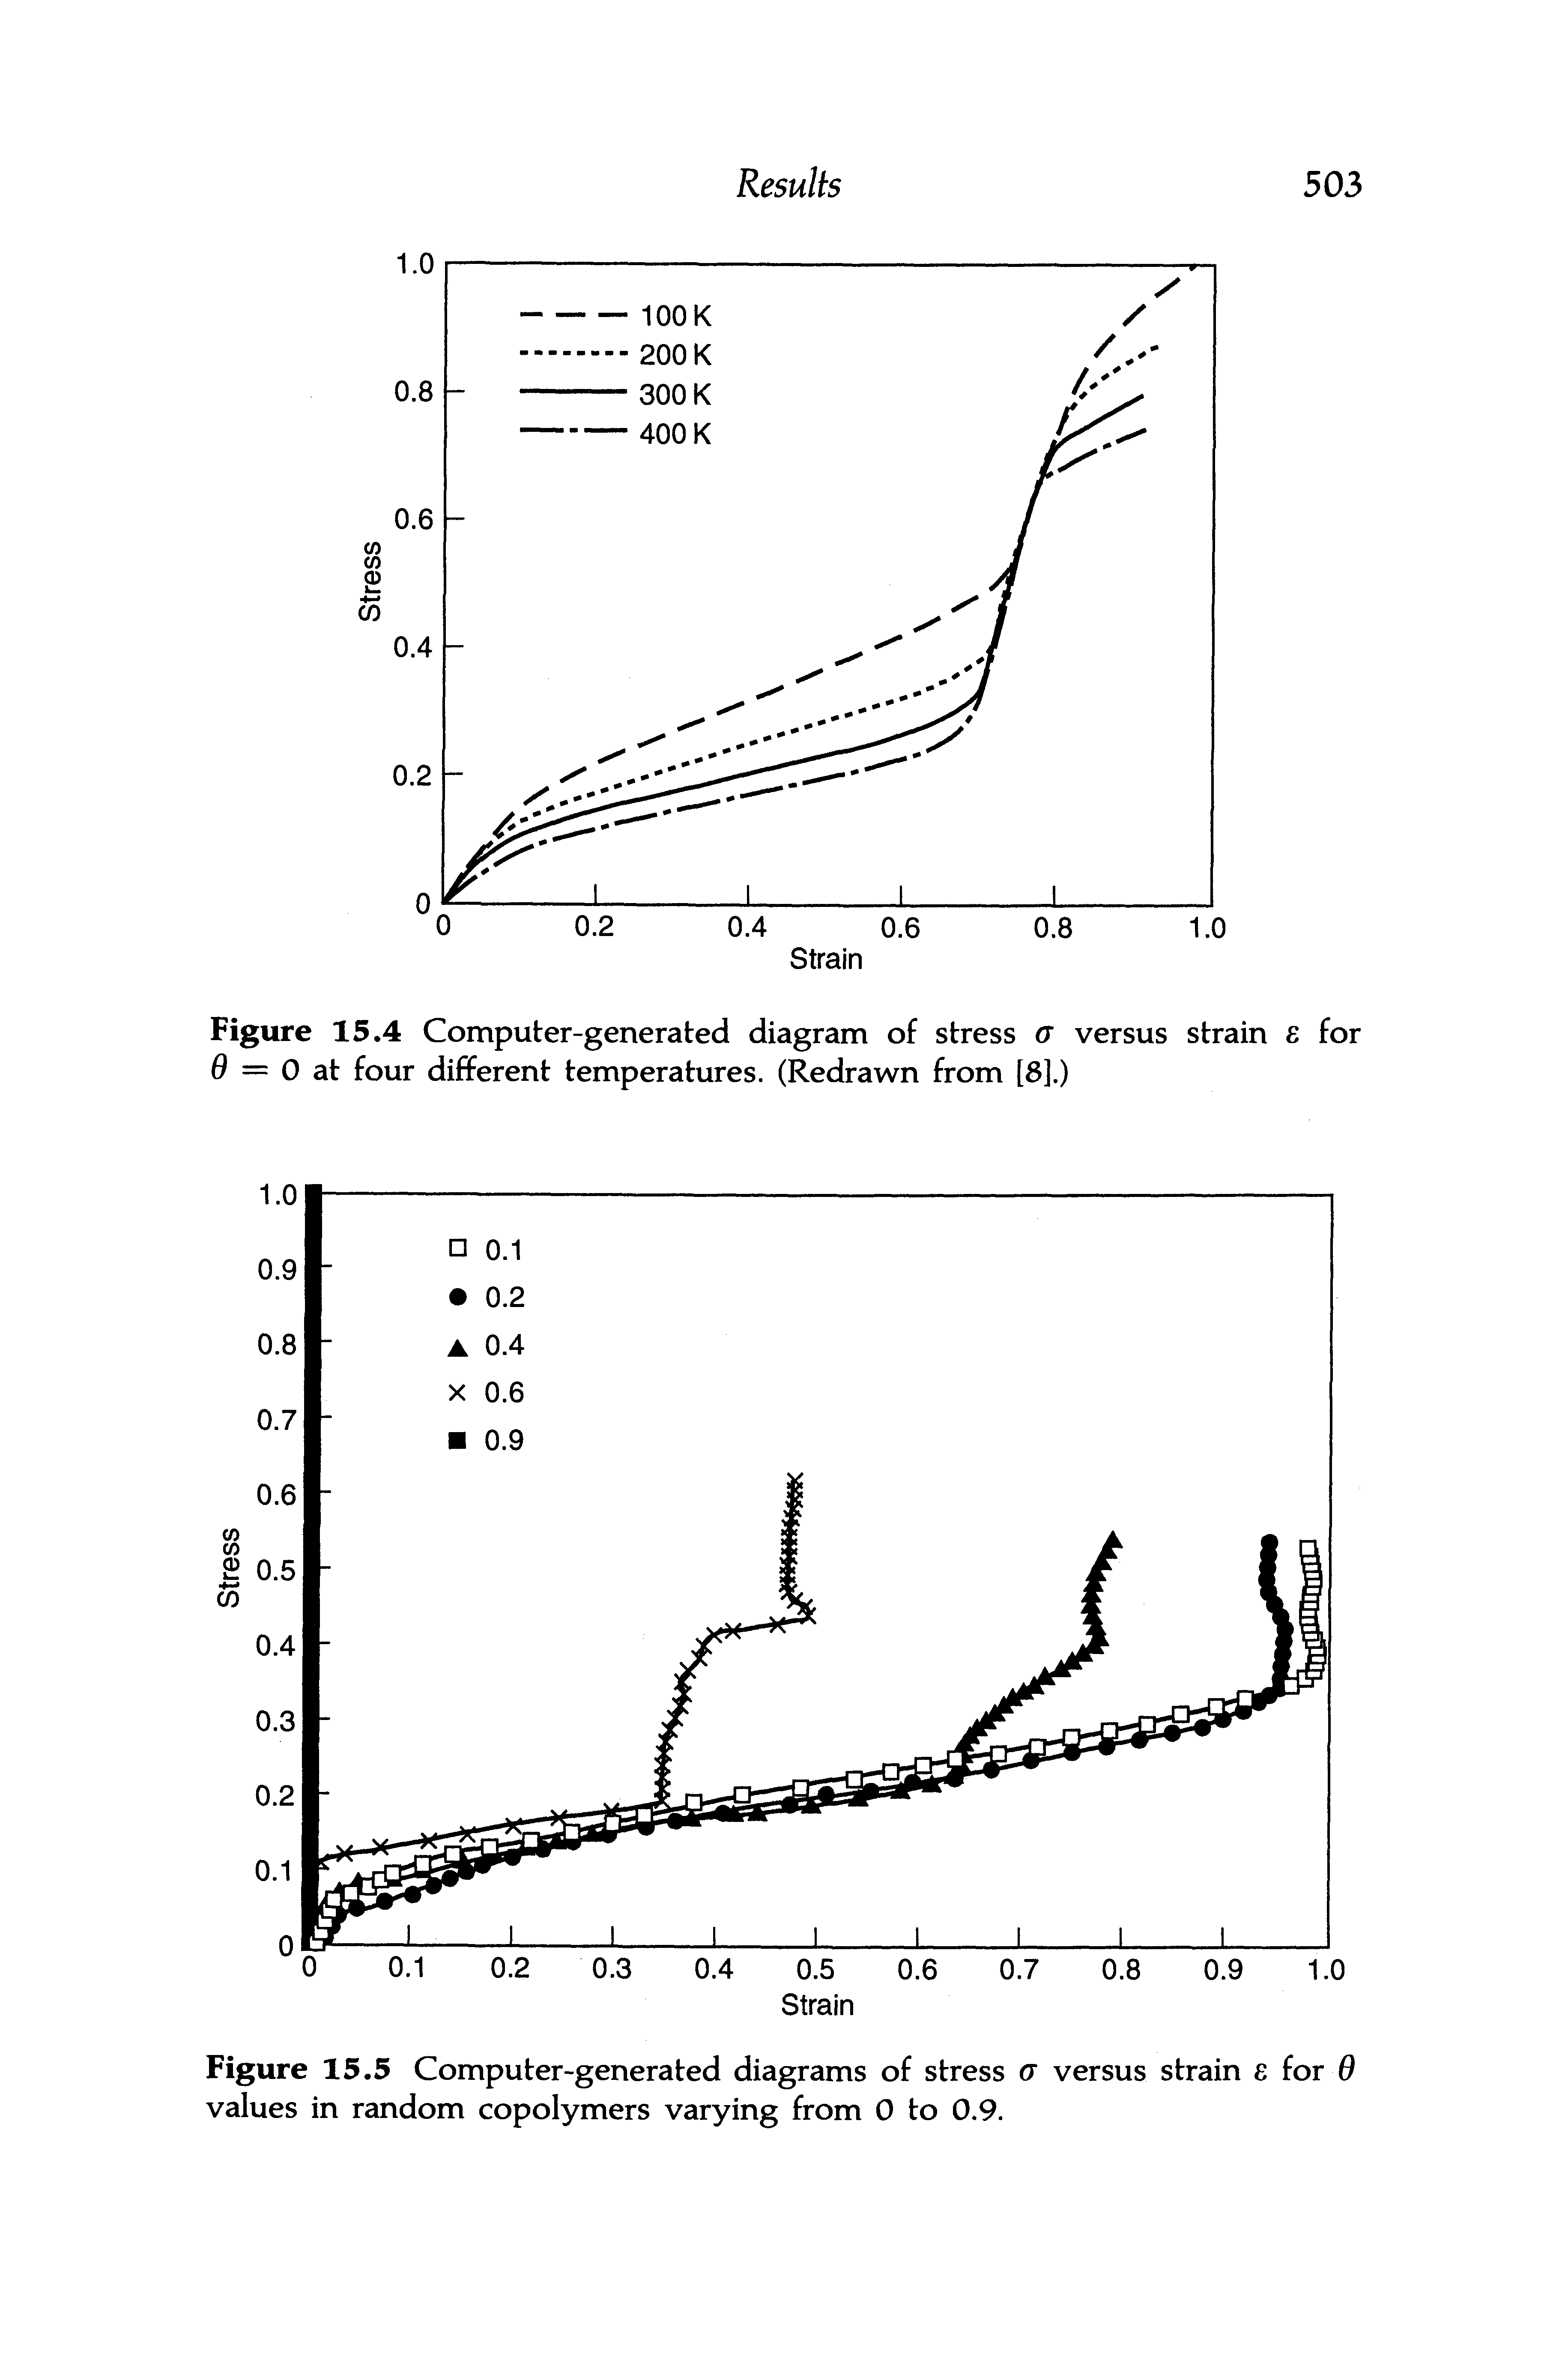 Figure 15.5 Computer-generated diagrams of stress a versus strain s for 0 values in random copolymers varying from 0 to 0.9.